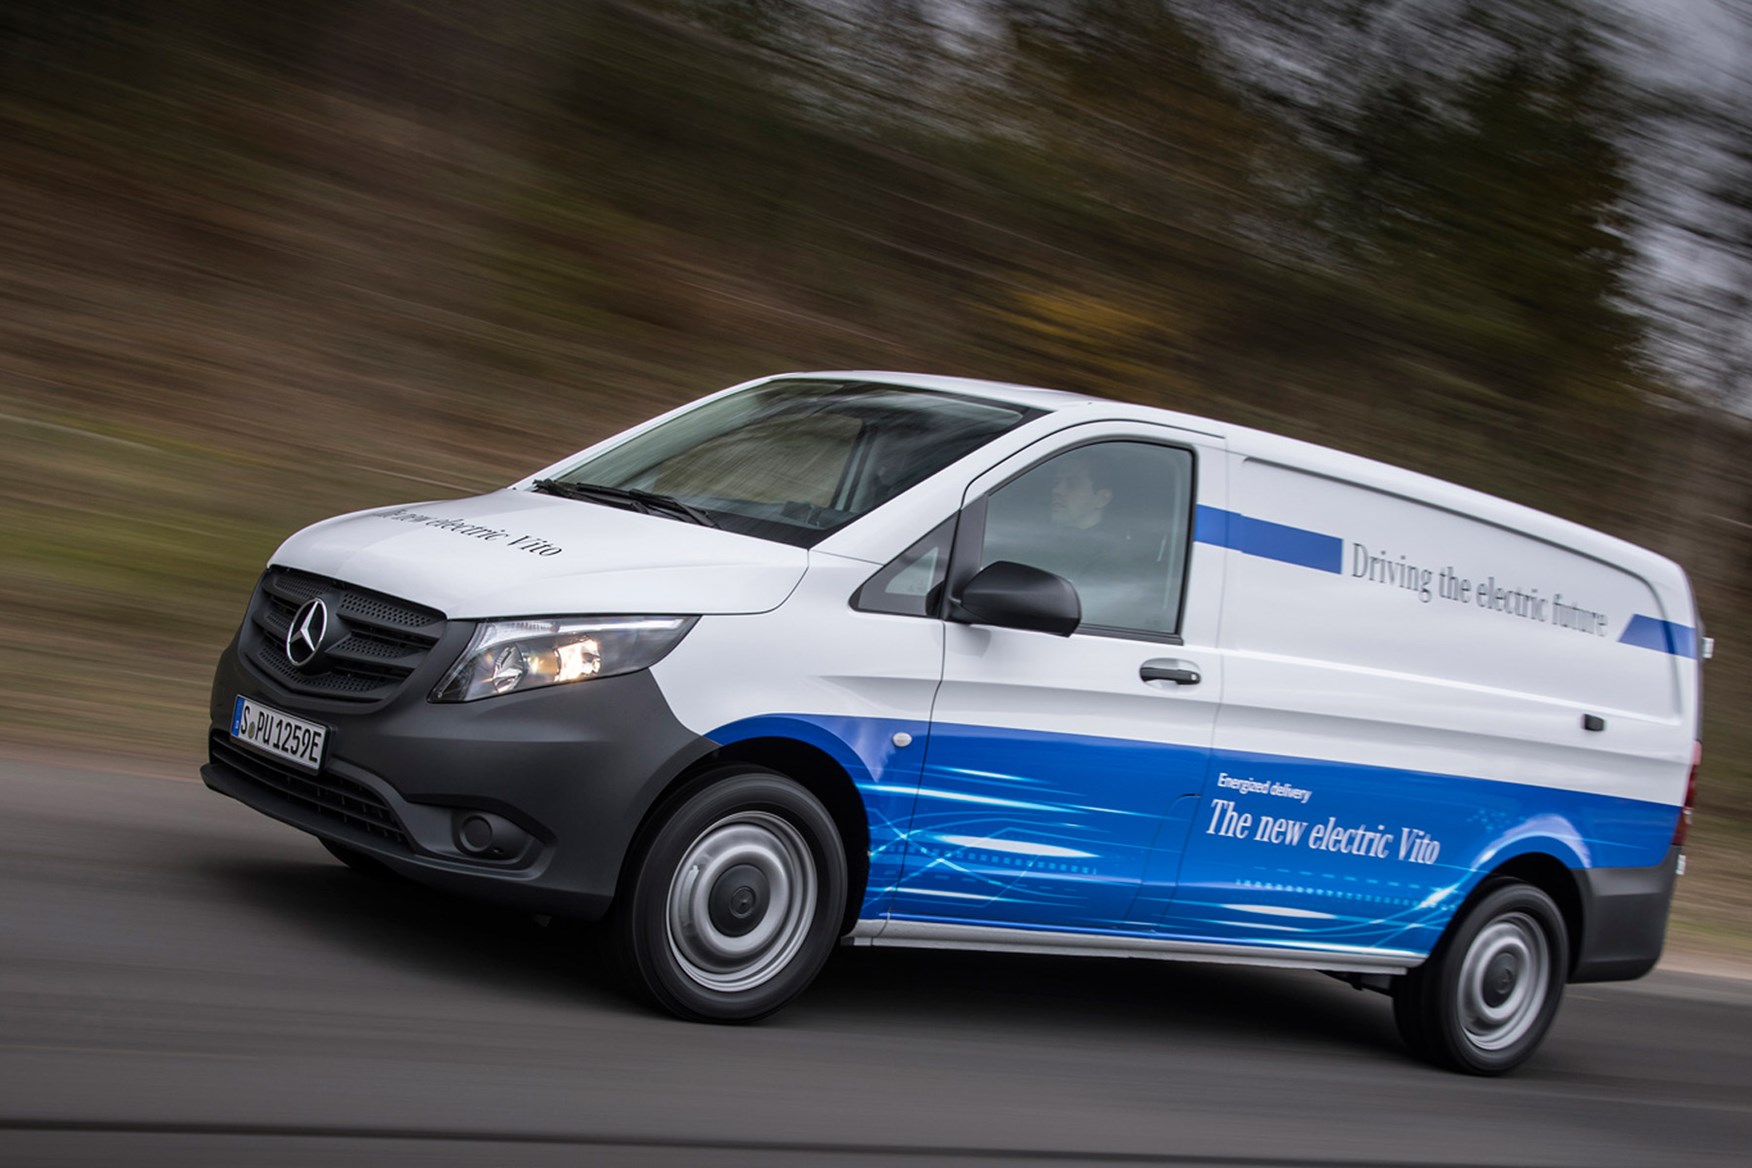 New look Mercedes-Benz Vito available in front, rear and all-wheel